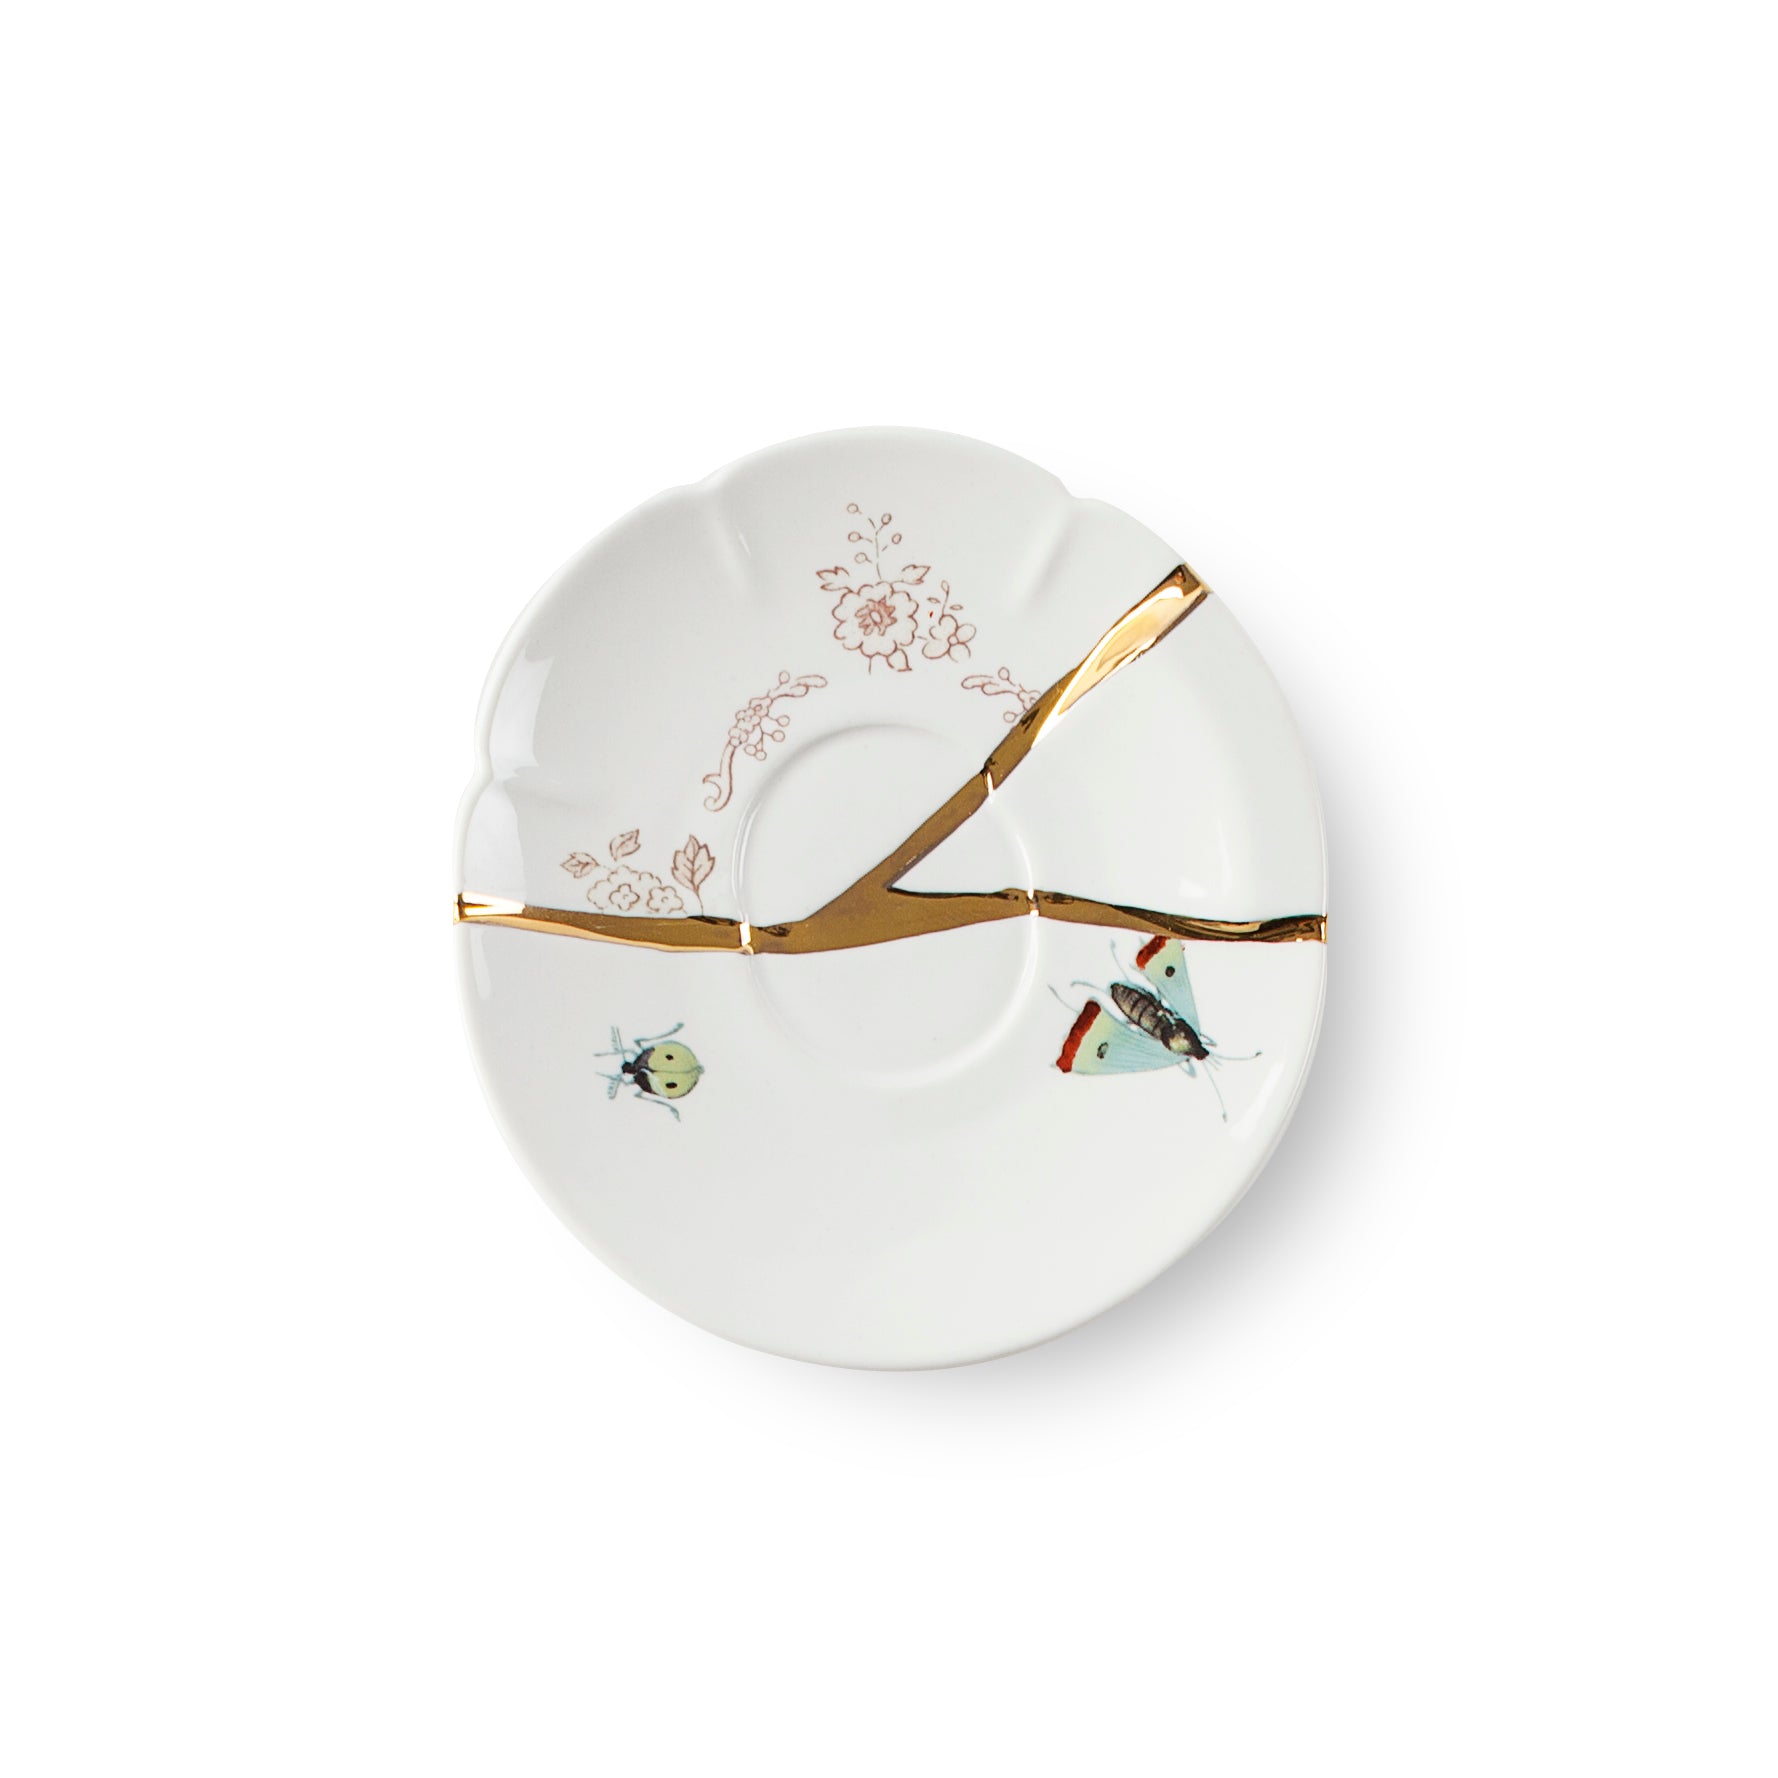 Seletti Kintsugi n°2 Coffee cup and saucer in porcelain